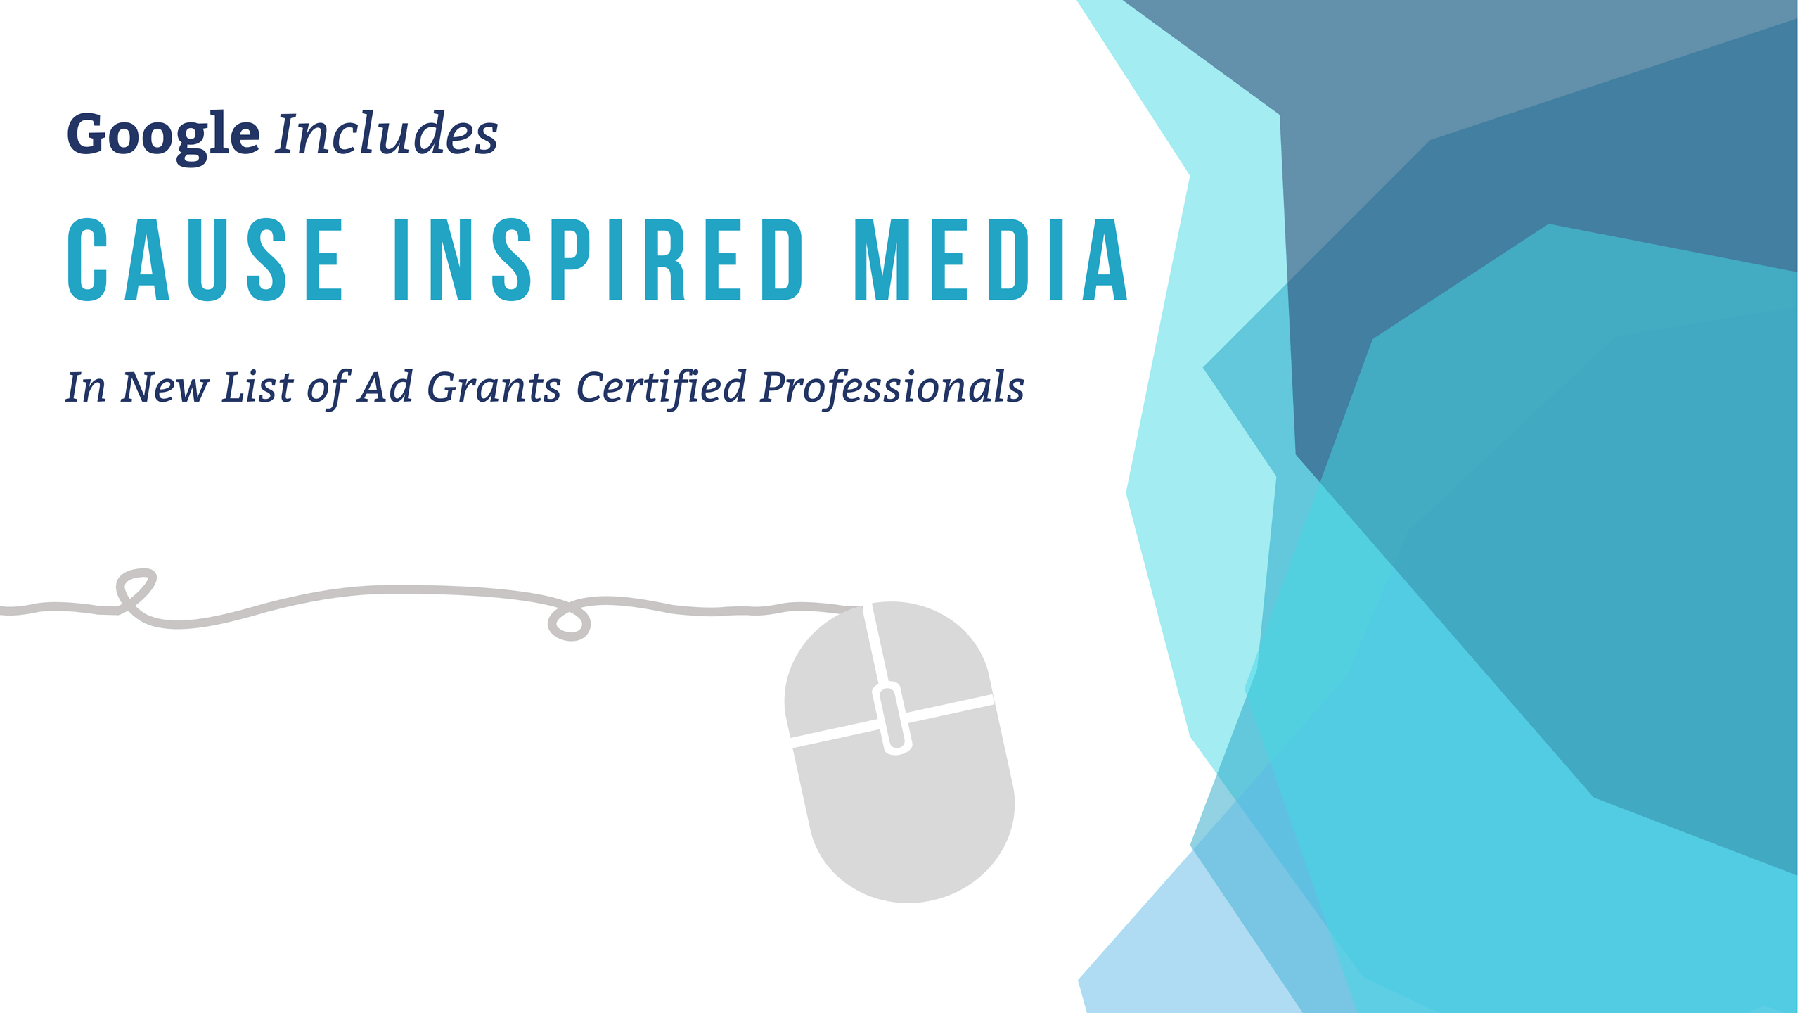 Google Includes Cause Inspired Media In New List of Ad Grants Certified Professionals